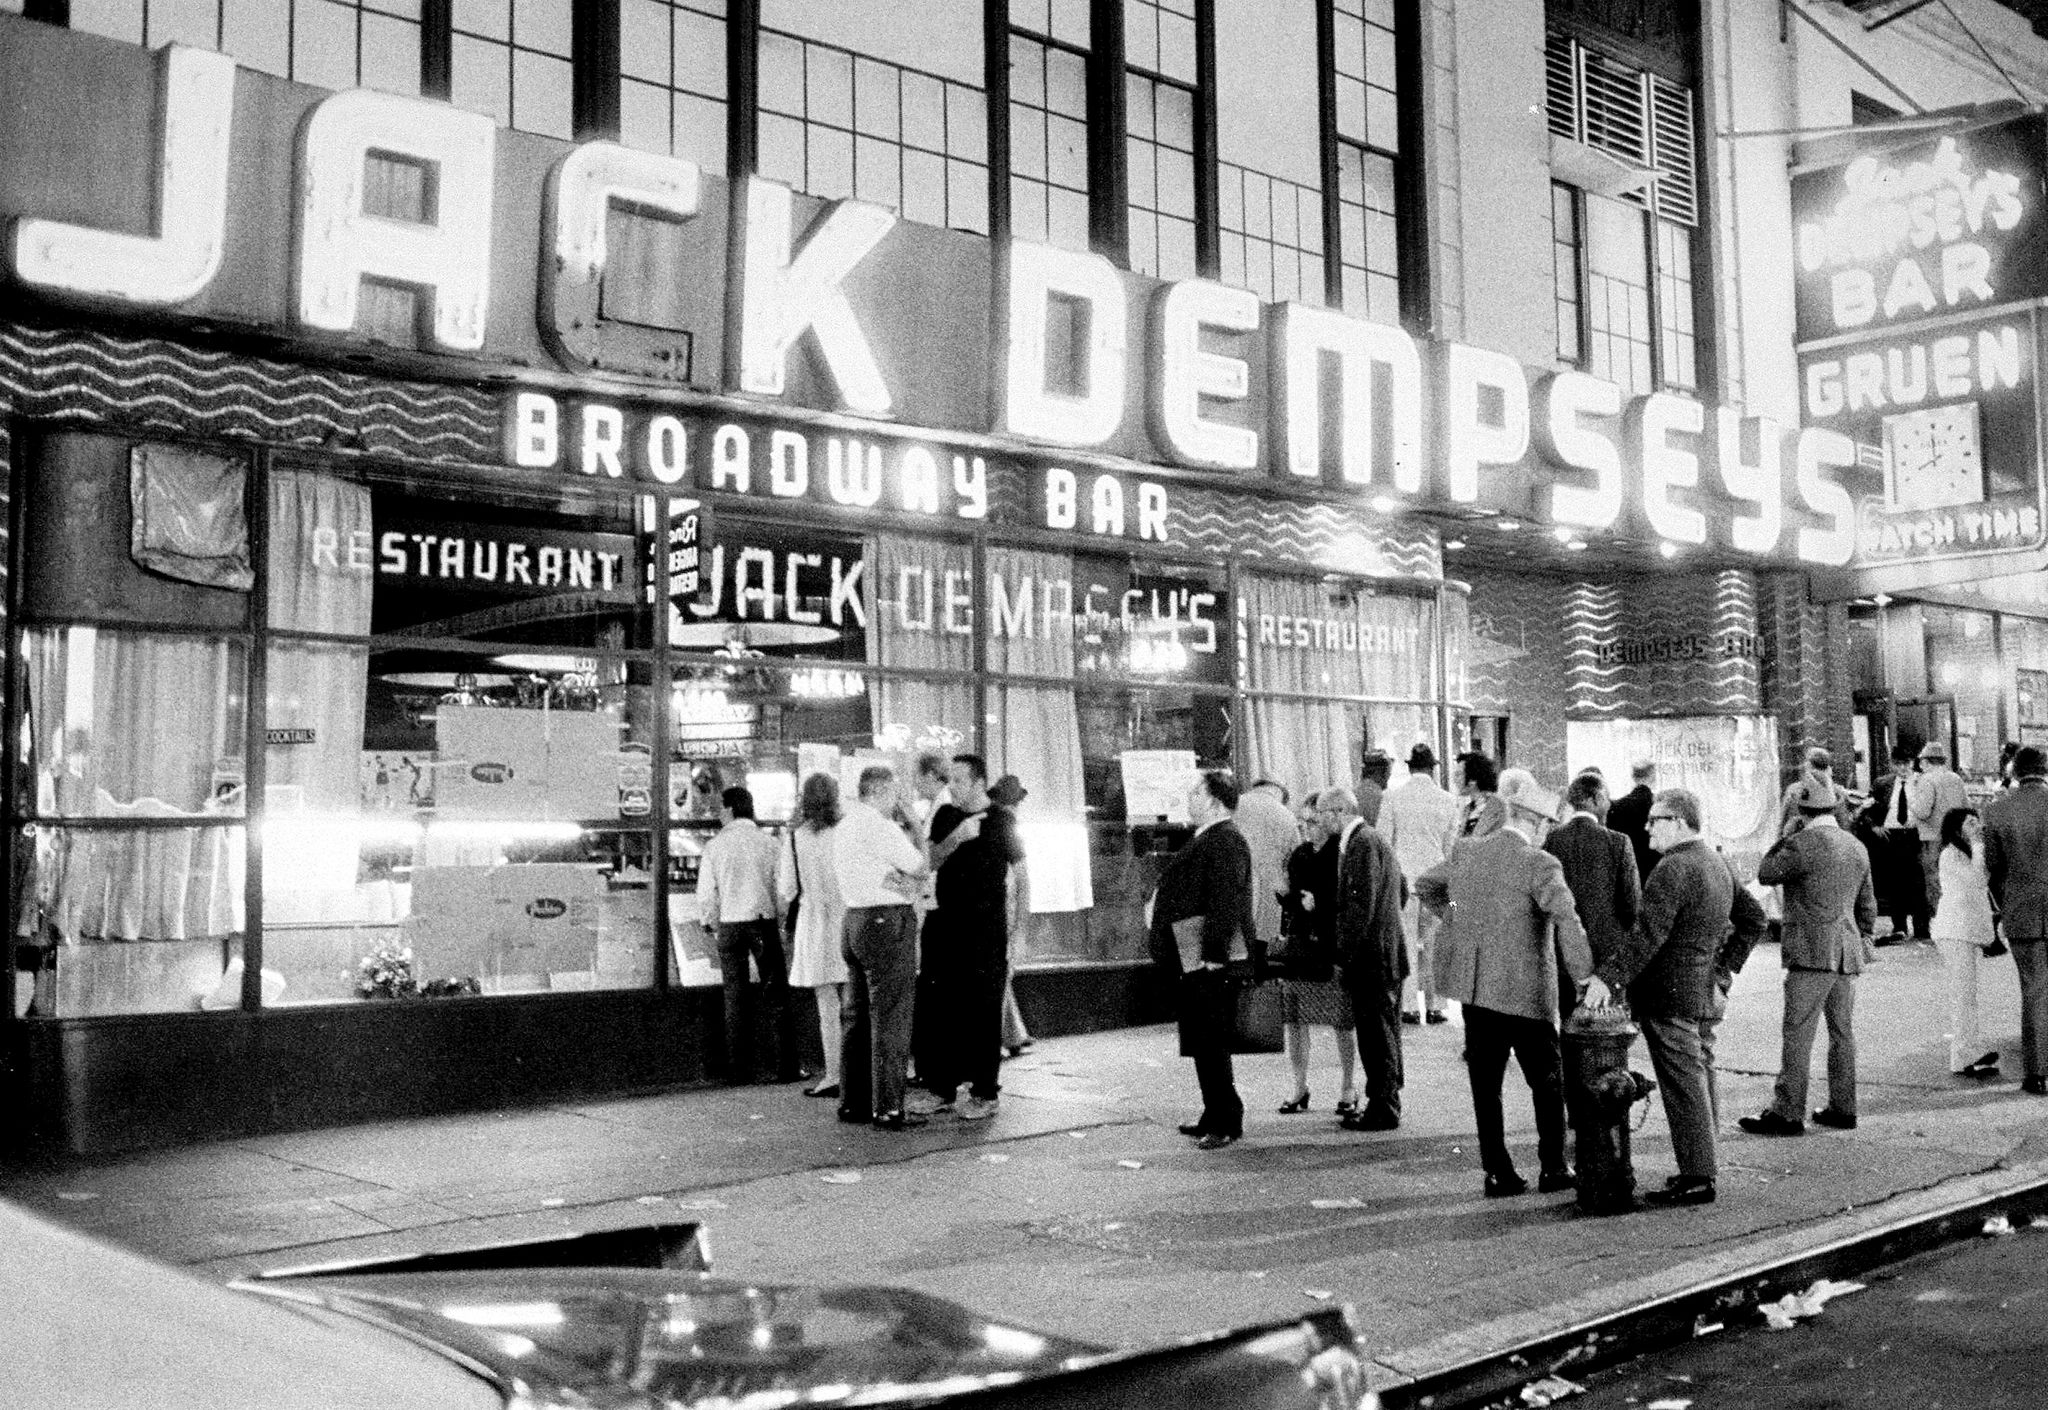 united states october 07 jack dempseys restaurant on broadway photo by gene kappockny daily news archive via getty images